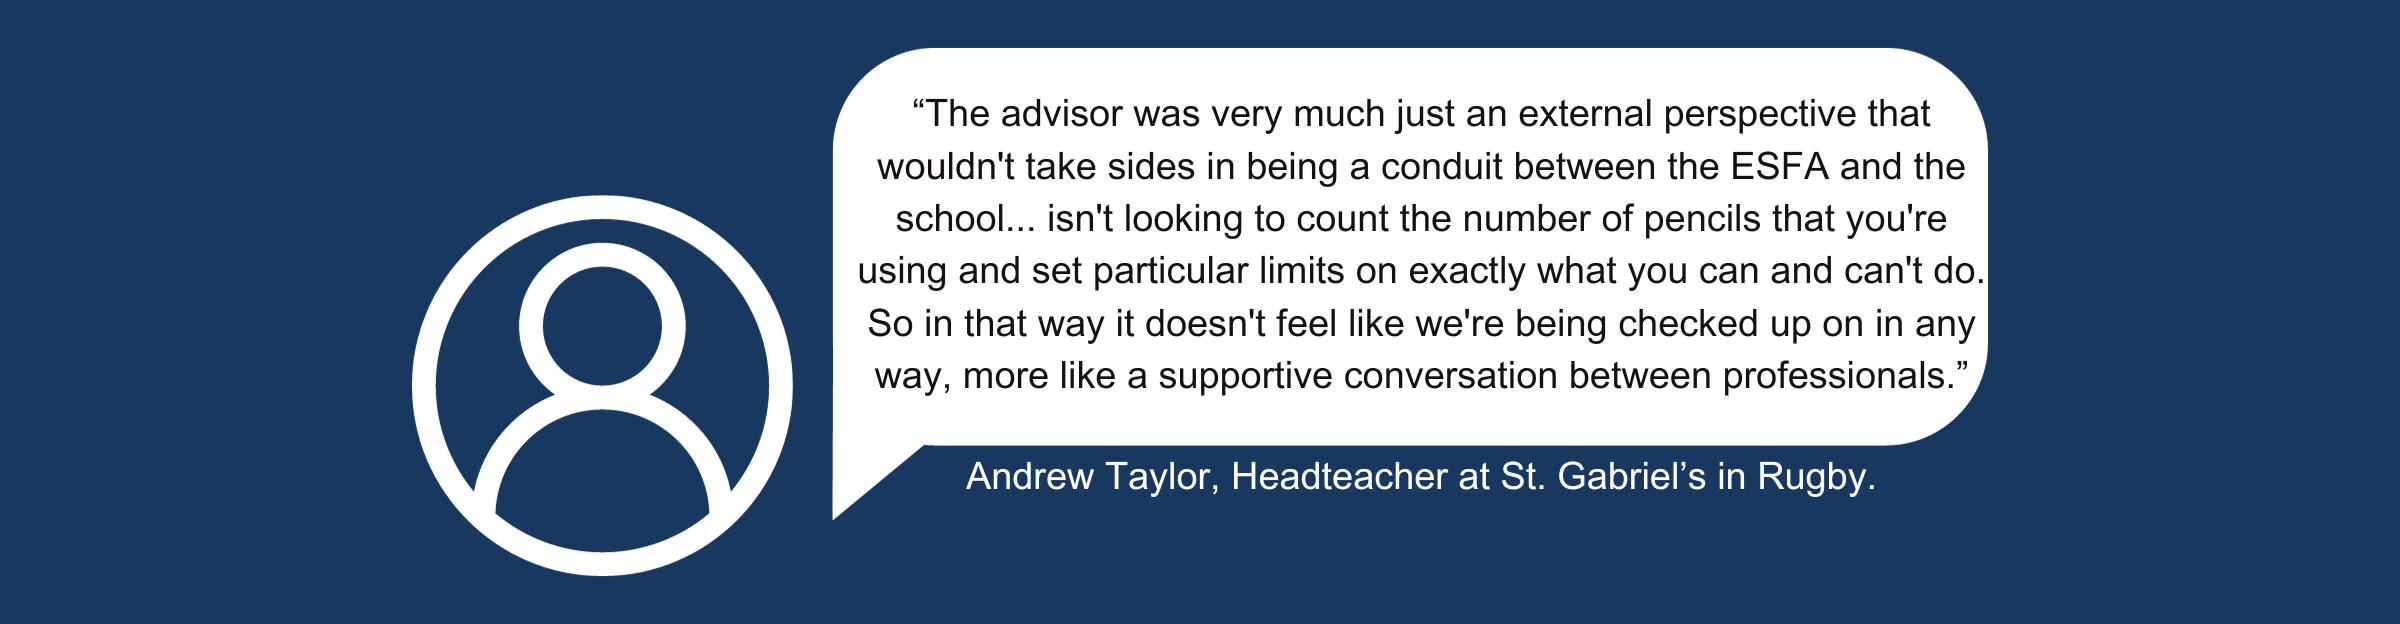 A quote from Andrew Taylor, Headteacher at St Gabriel’s in Rugby, which reads: “The advisor was very much just an external perspective that wouldn’t take sides in being a conduit between the ESFA and the school…isn’t looking to count the number of pencils that you’re using and set particular limits on exactly what you can and can’t do. So in that way it doesn’t feel like we’re being checked up on in any way, more like a supportive conversation between professionals.”